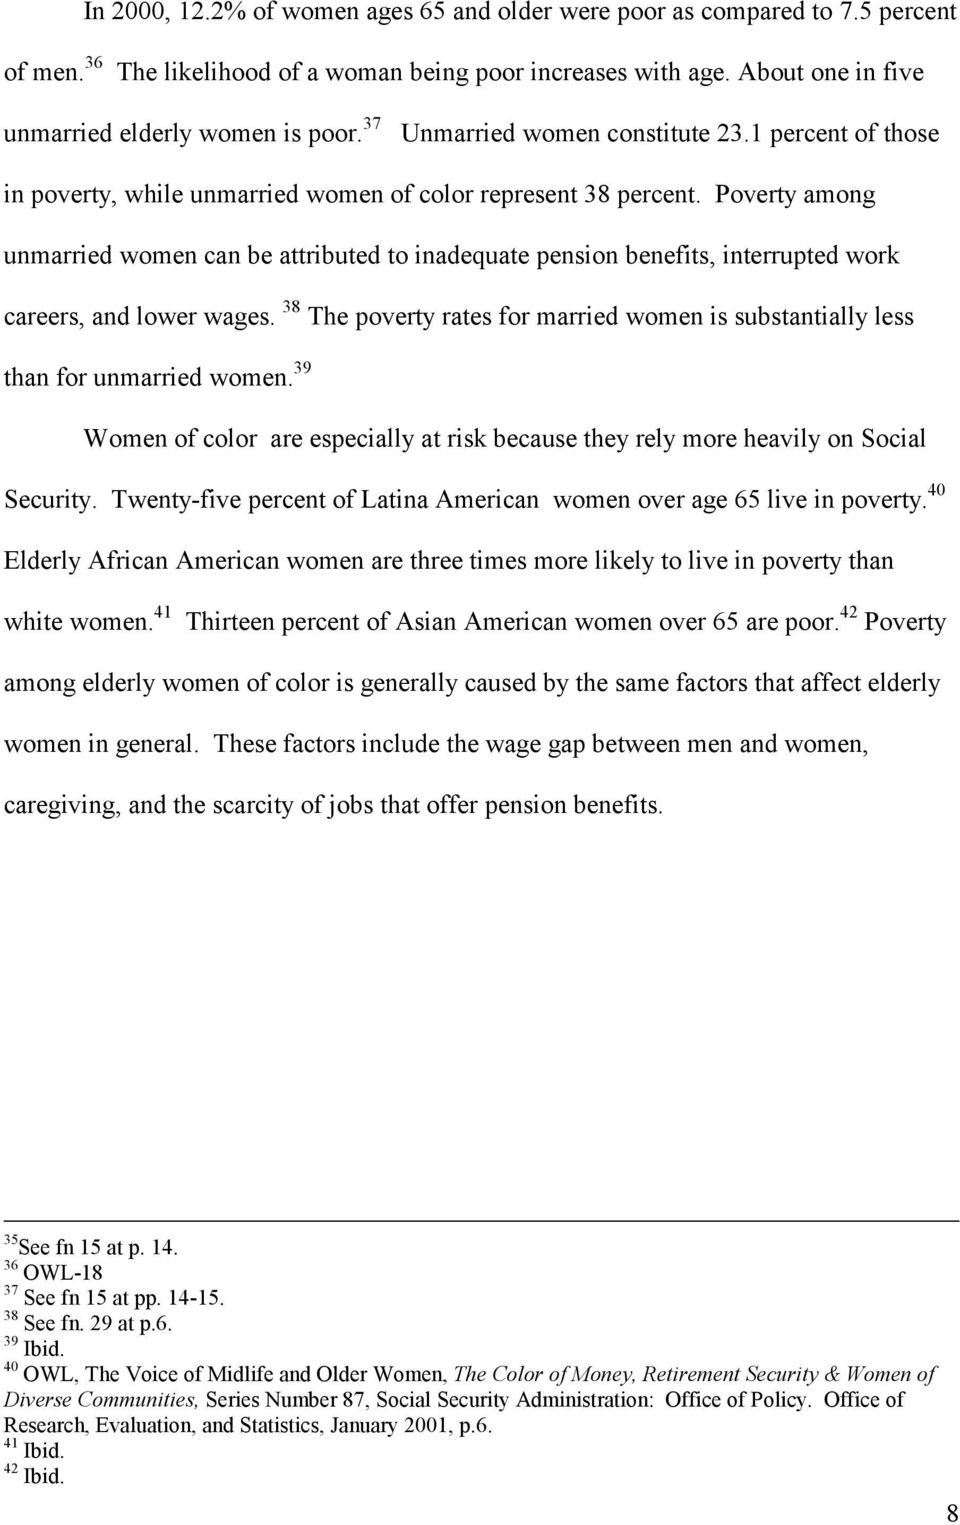 Poverty among unmarried women can be attributed to inadequate pension benefits, interrupted work careers, and lower wages.